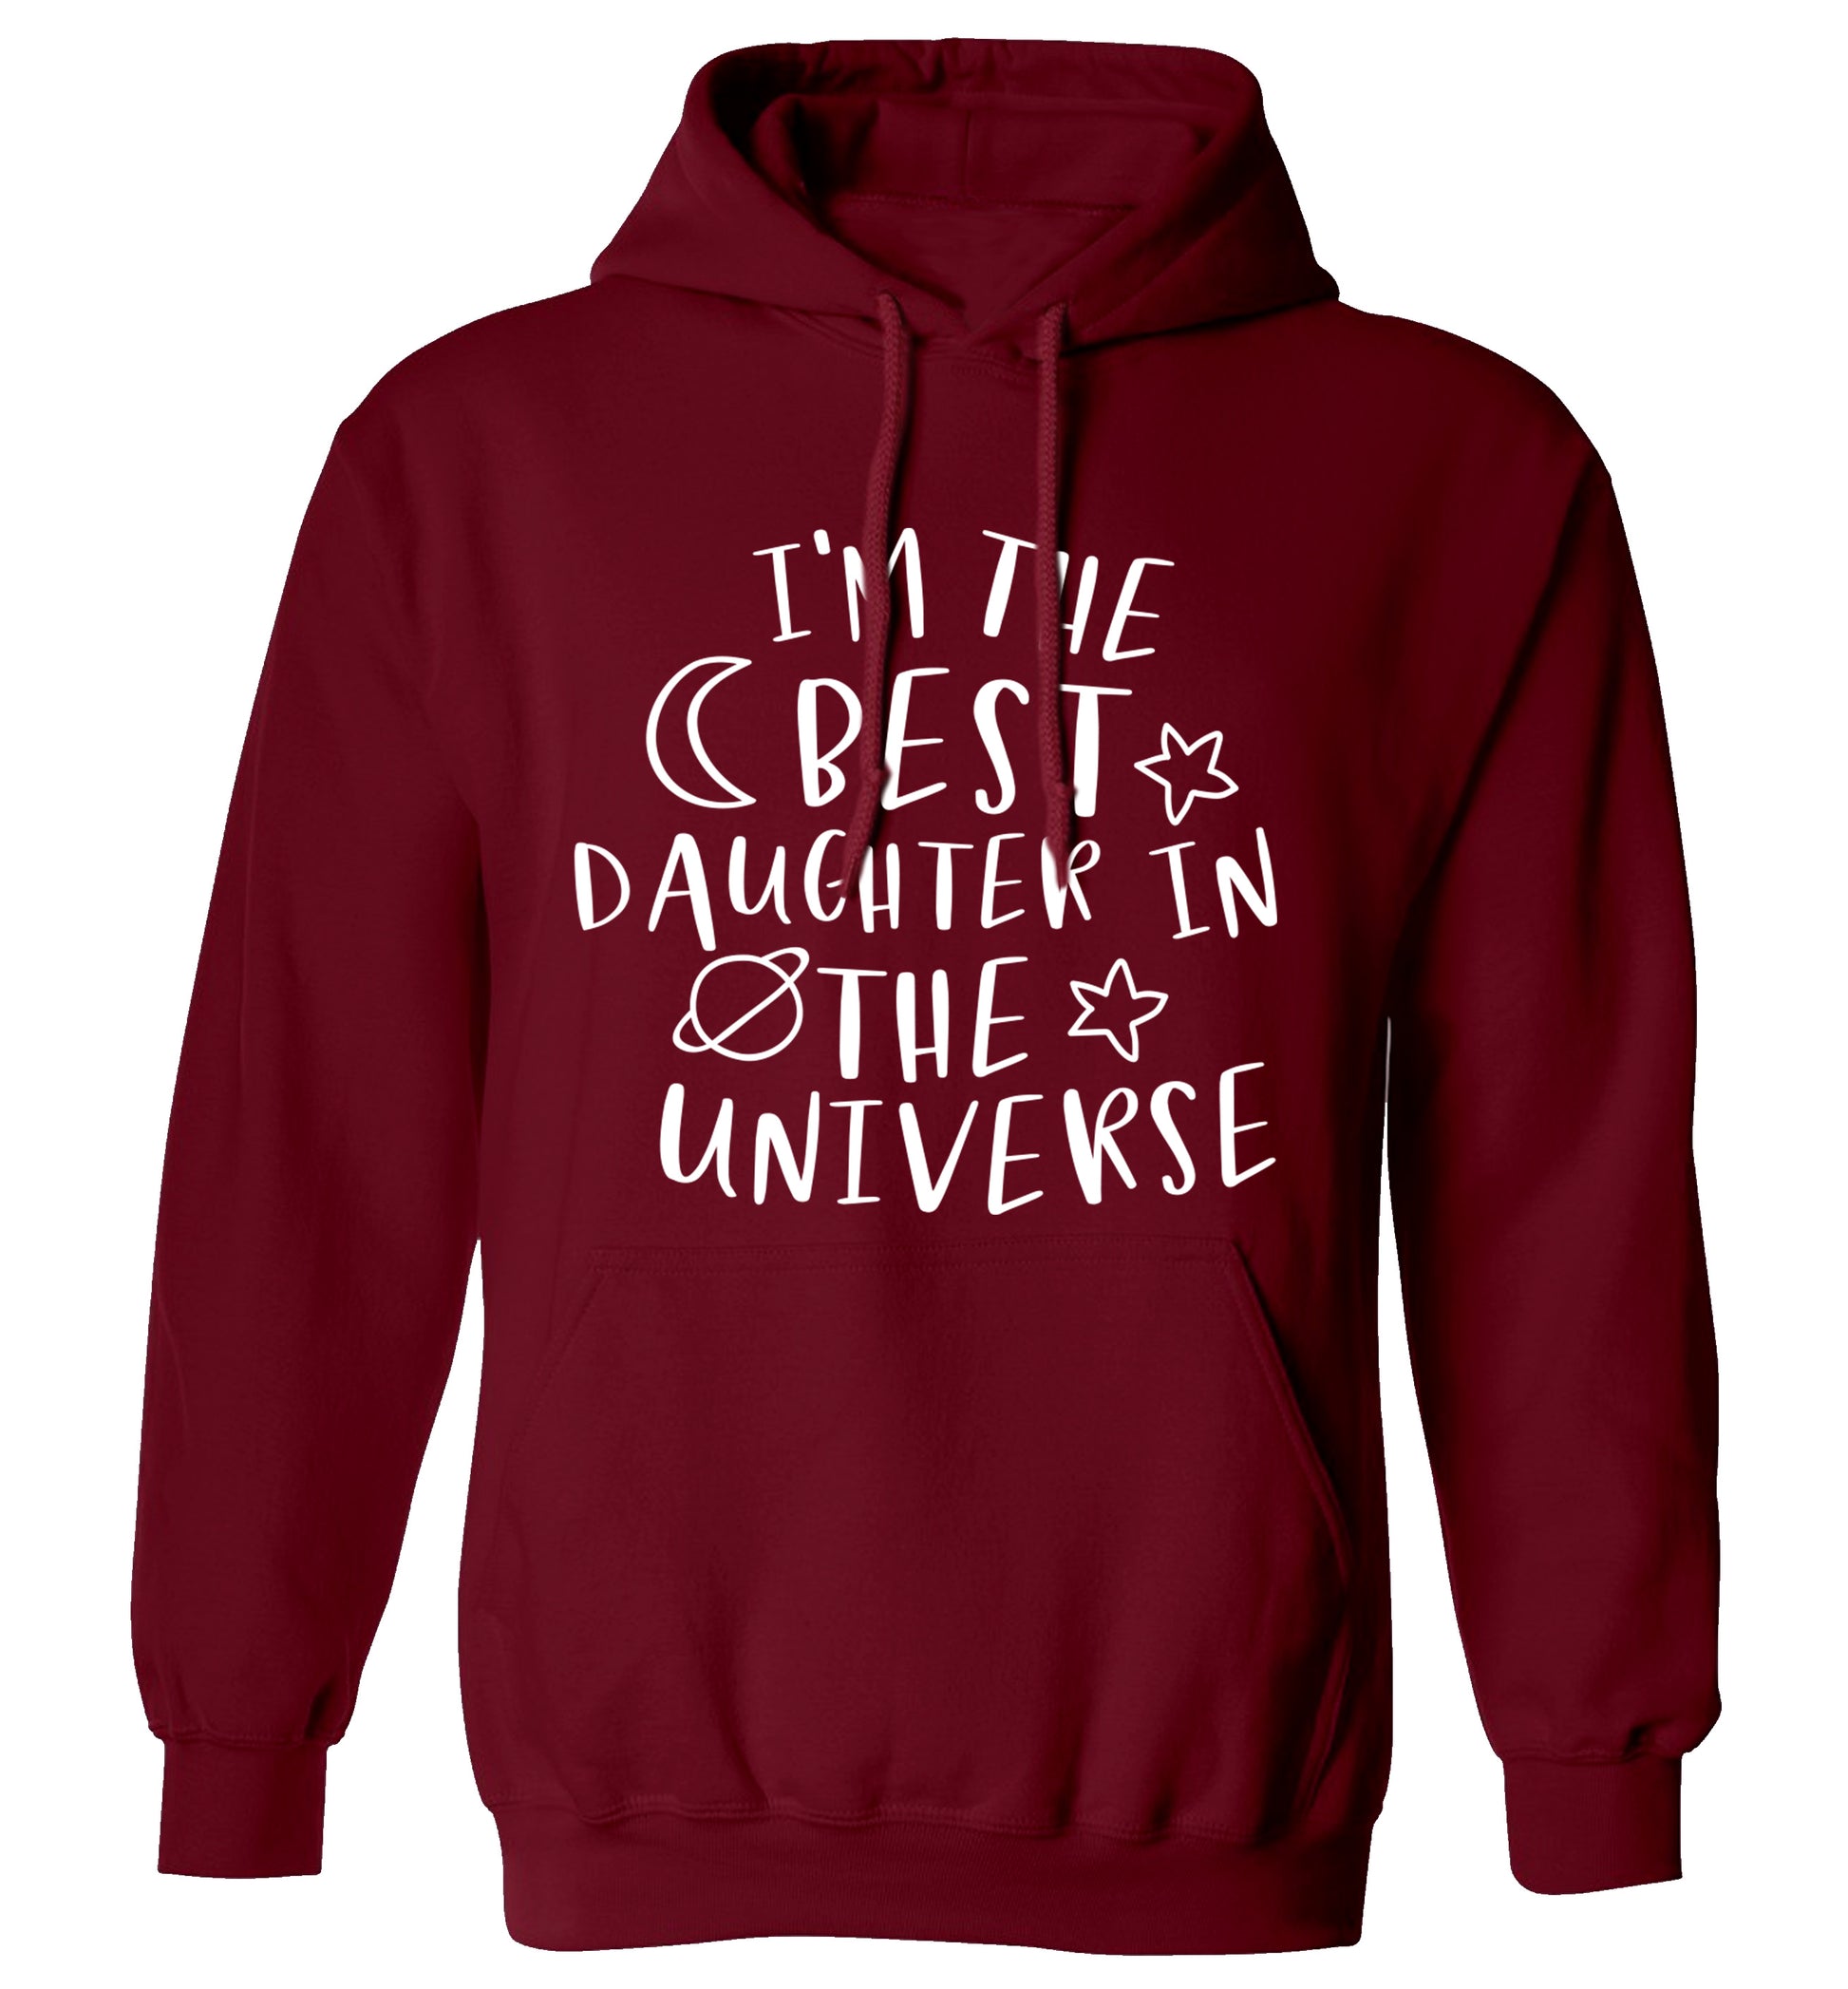 I'm the best daughter in the universe adults unisex maroon hoodie 2XL